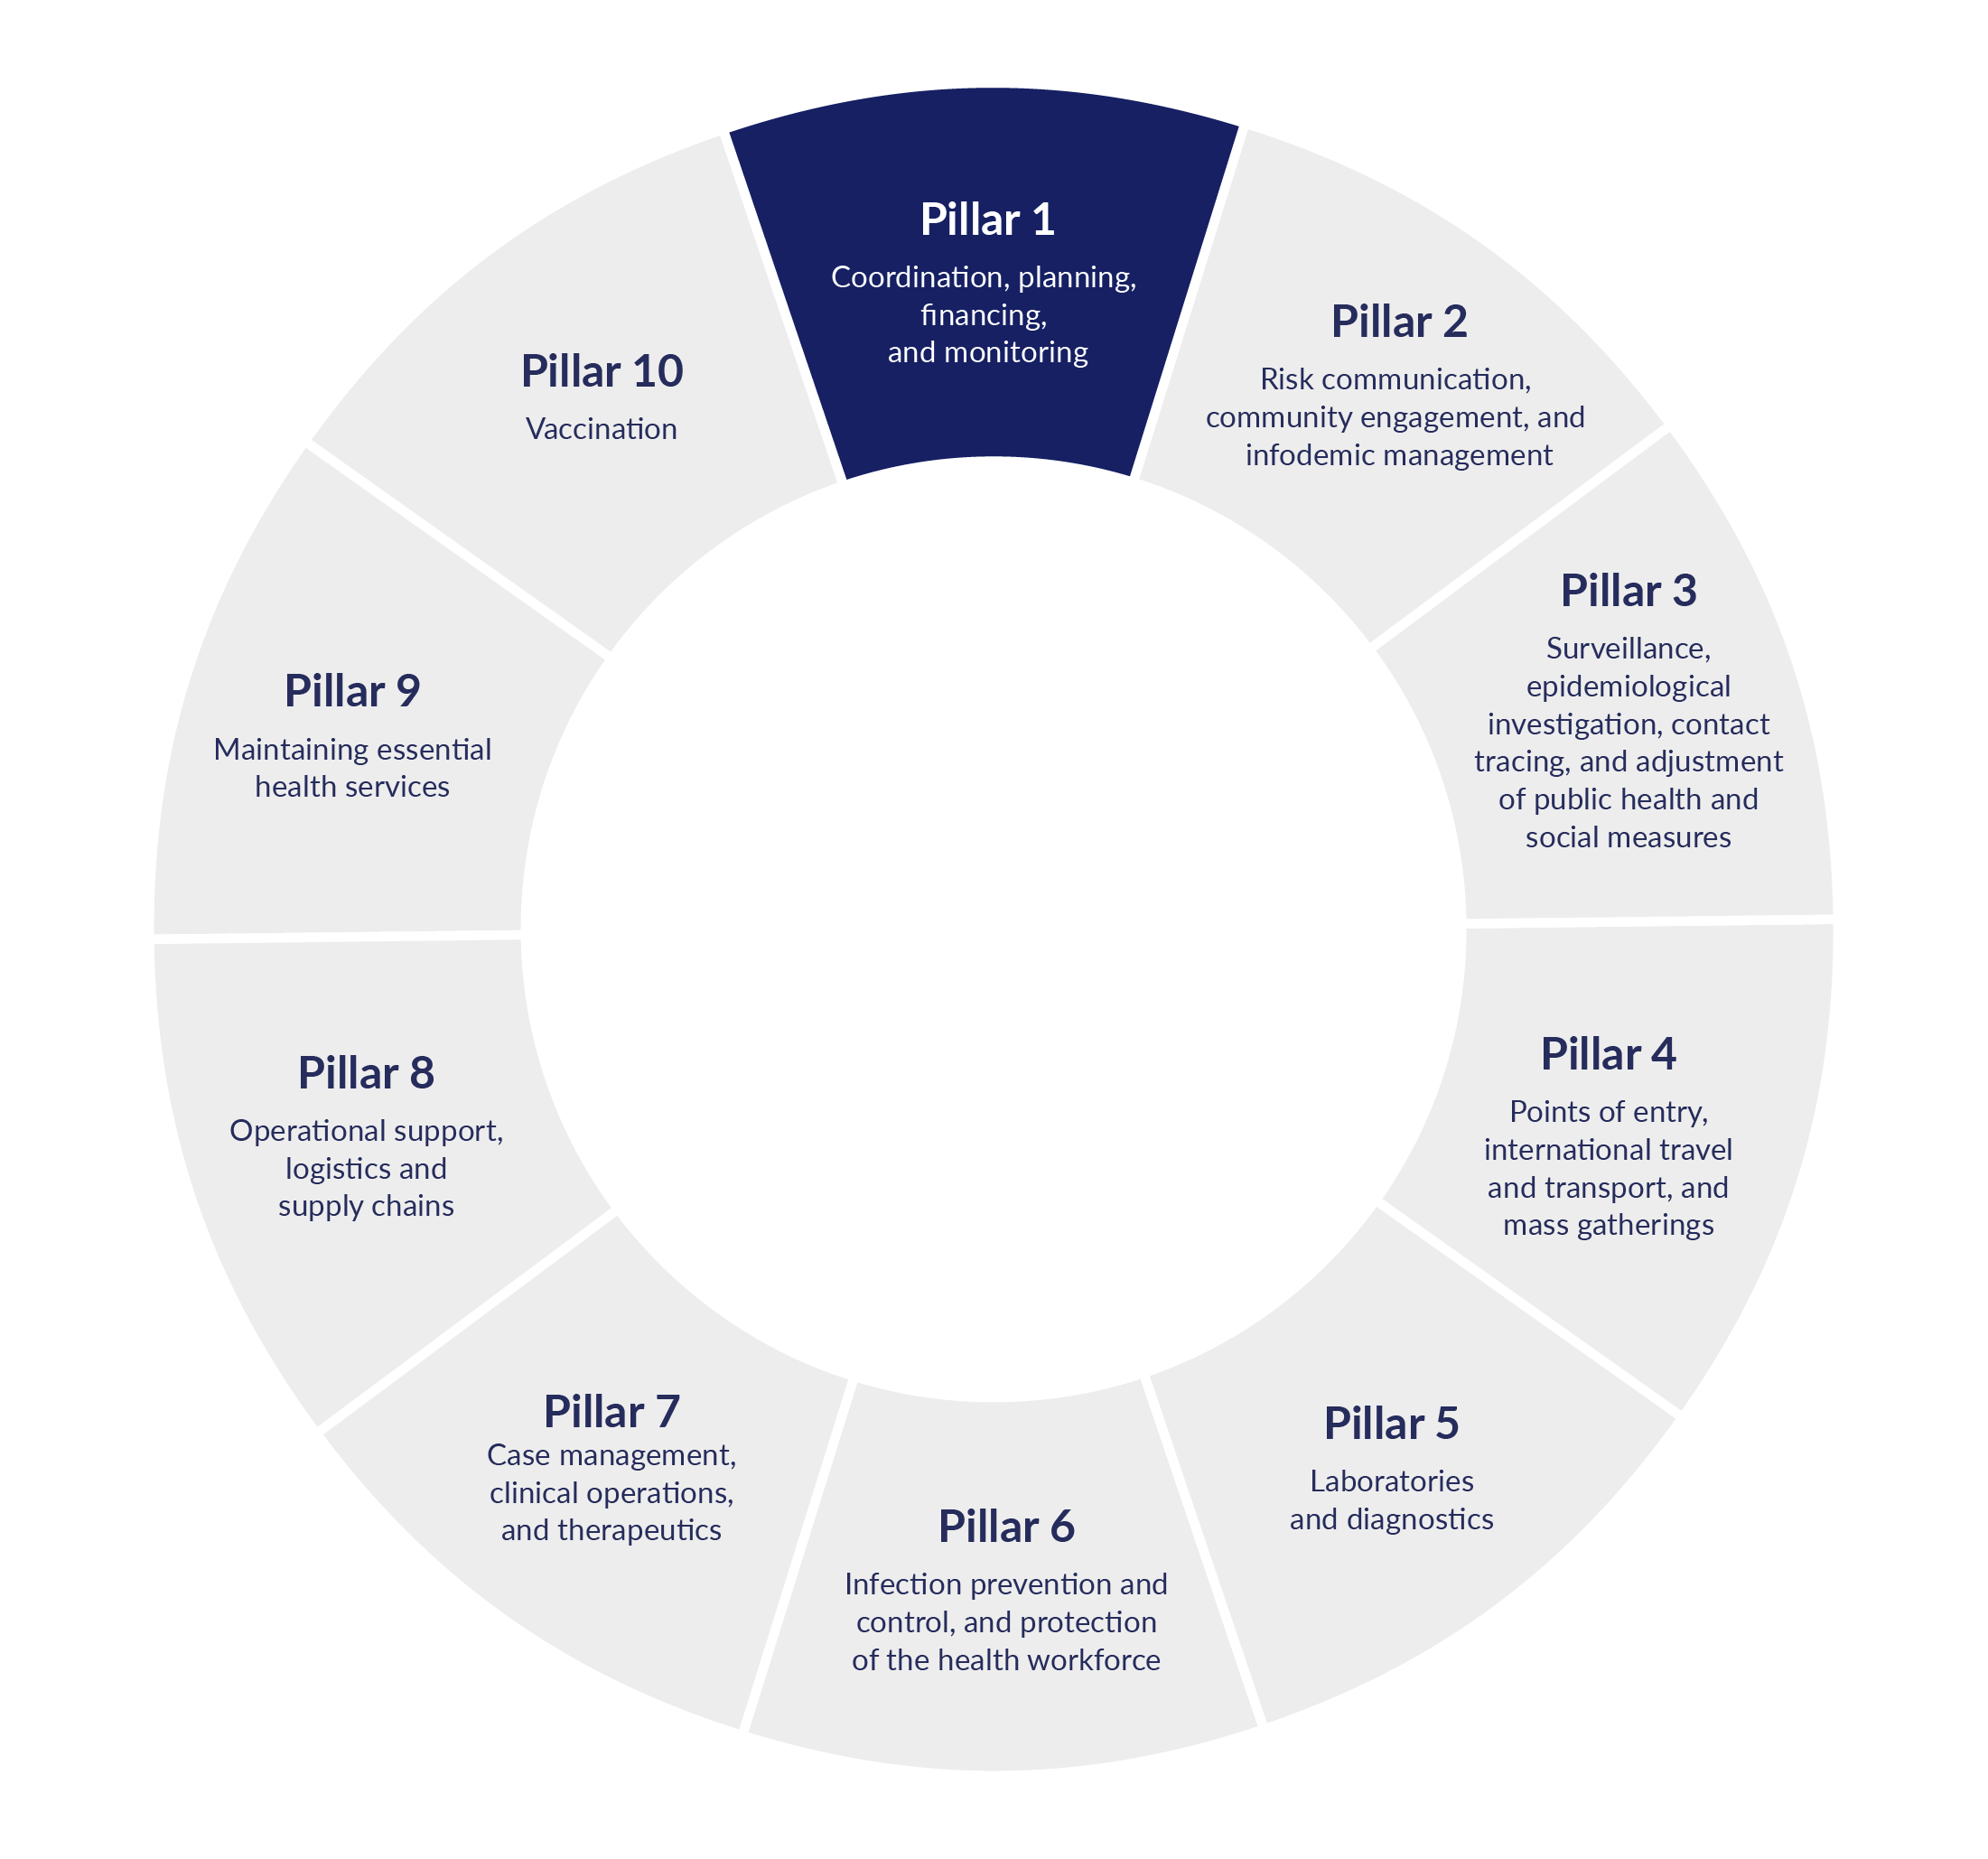 GIF of a circular diagram. The circle is divided into 10 segments. Each segment represents one pillar of the WHO emergency response. As the GIF progresses it reveals one possible way in which between Pillar 1 could influence other Pillars in turn.  Pillar 1 is "Coordination, planning,  financing, and monitoring", and underpins responses in all other pillars.  Pillar 2 is Risk communication,  community engagement, and  infodemic management. Pillar 1 connects to Pillar 2: Decision makers collude with  vendors to set up unnecessary  or inflated community  engagement plans. No work is delivered, but payments are pushed through anyway.  Pillar 3 is Surveillance, epidemiological investigation, contact  tracing, and adjustment  of public health and  social measures Pillar 1 connects to Pillar 3: Control over the publication  of key data is limited to specific agencies, such that information  is delayed or blocked, disrupting monitoring efforts by civil society and aid organisations.   Pillar 4  is Points of entry,  international travel  and transport, and  mass gatherings. Pillar 1 connects to Pillar 4: With more official barriers to travel, or requiring the issuance  of permits for movement, scope  is provided for monopolistic pricing and procedures open  to conflict of interest.  Pillar 5  is Laboratories  and diagnostics. Pillar 1 connects to Pillar 5: Substandard labs with political links are given preferential access to apply to give services for diagnostic work.   Pillar 6  is Infection prevention and control, and protection  of the health workforce. Pillar 1 connects to Pillar 6: Through a conflict of interest, selection criteria are established that will permit a monopoly  to be granted on a vital  (and lucrative) antibacterial product. Kickbacks are paid to those appointed to evaluate other importers or manufacturers.    Pillar 7  is Case management,  clinical operations, and therapeutics. Pillar 1 connects to Pillar 7: Where public health services are weak or overwhelmed,  and central regulation is lax, selection of additional services from private health providers can open opportunities  to charge exorbitant fees.  Pillar 8  is Operational support,  logistics and supply chains. Pillar 1 connects to Pillar 8: Normal procurement practices  are set aside, on grounds of urgency, with fast-track and single-source decisions promoted, in lieu of expert-led and independent selection and review of contract terms.  Pillar 9  is Maintaining essential  health services. Pillar 1 connects to Pillar 9: Hospitals receive emergency funds at the Ministry’s discretion. Favouritism and conflicts  of interest mean funds are not fairly distributed.  Pillar 10 is Vaccination. Pillar 1 connects to Pillar 10: ‘Cash-for-vaccination’ schemes are vulnerable to corruption, such as registering non-existent recipients.        